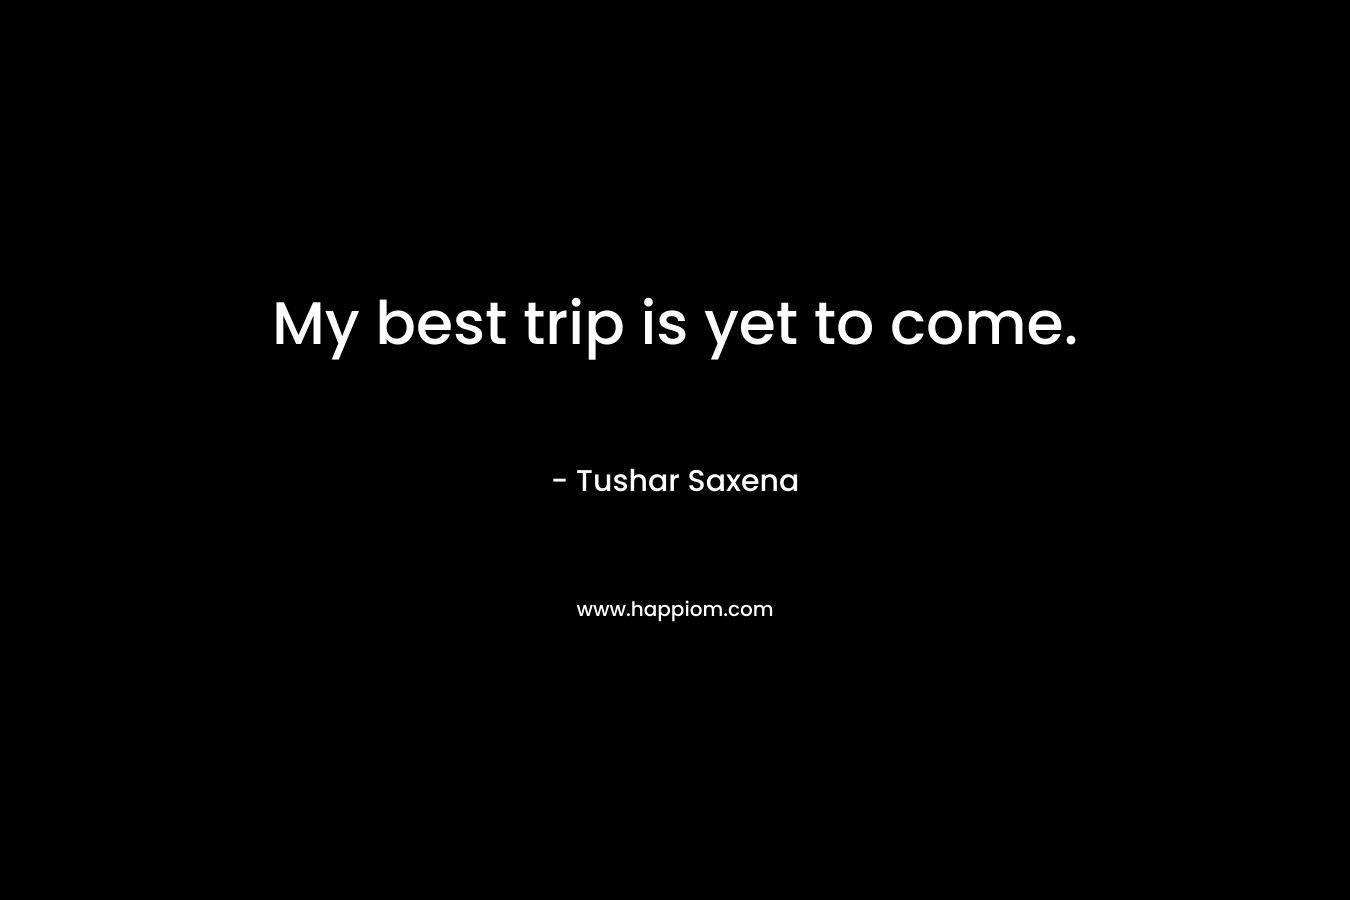 My best trip is yet to come. – Tushar Saxena